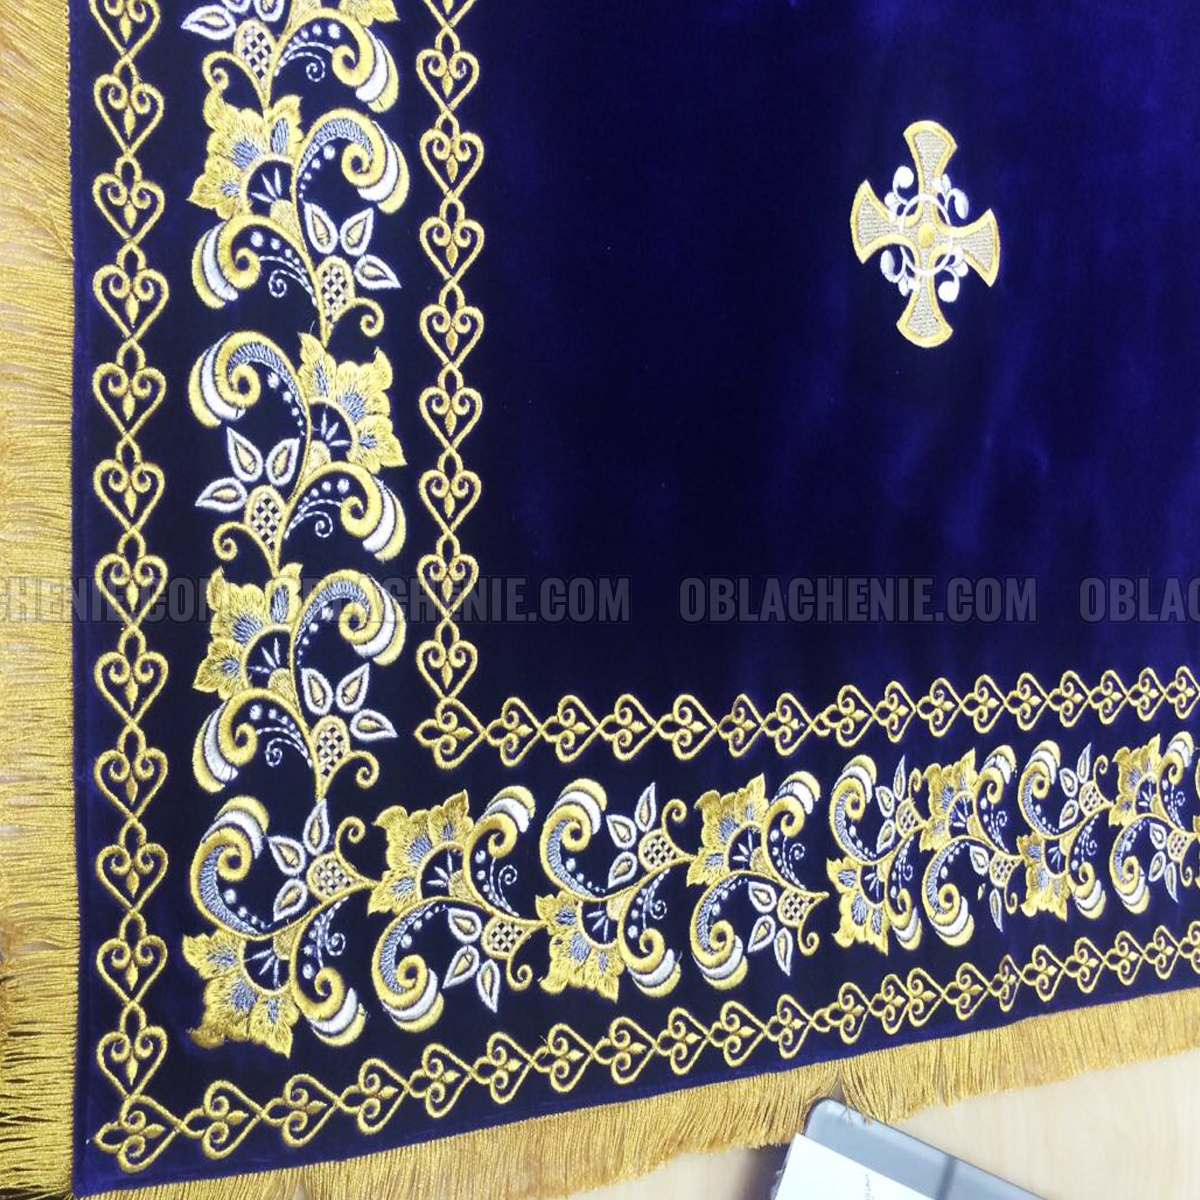 Holy Table vestments 10442